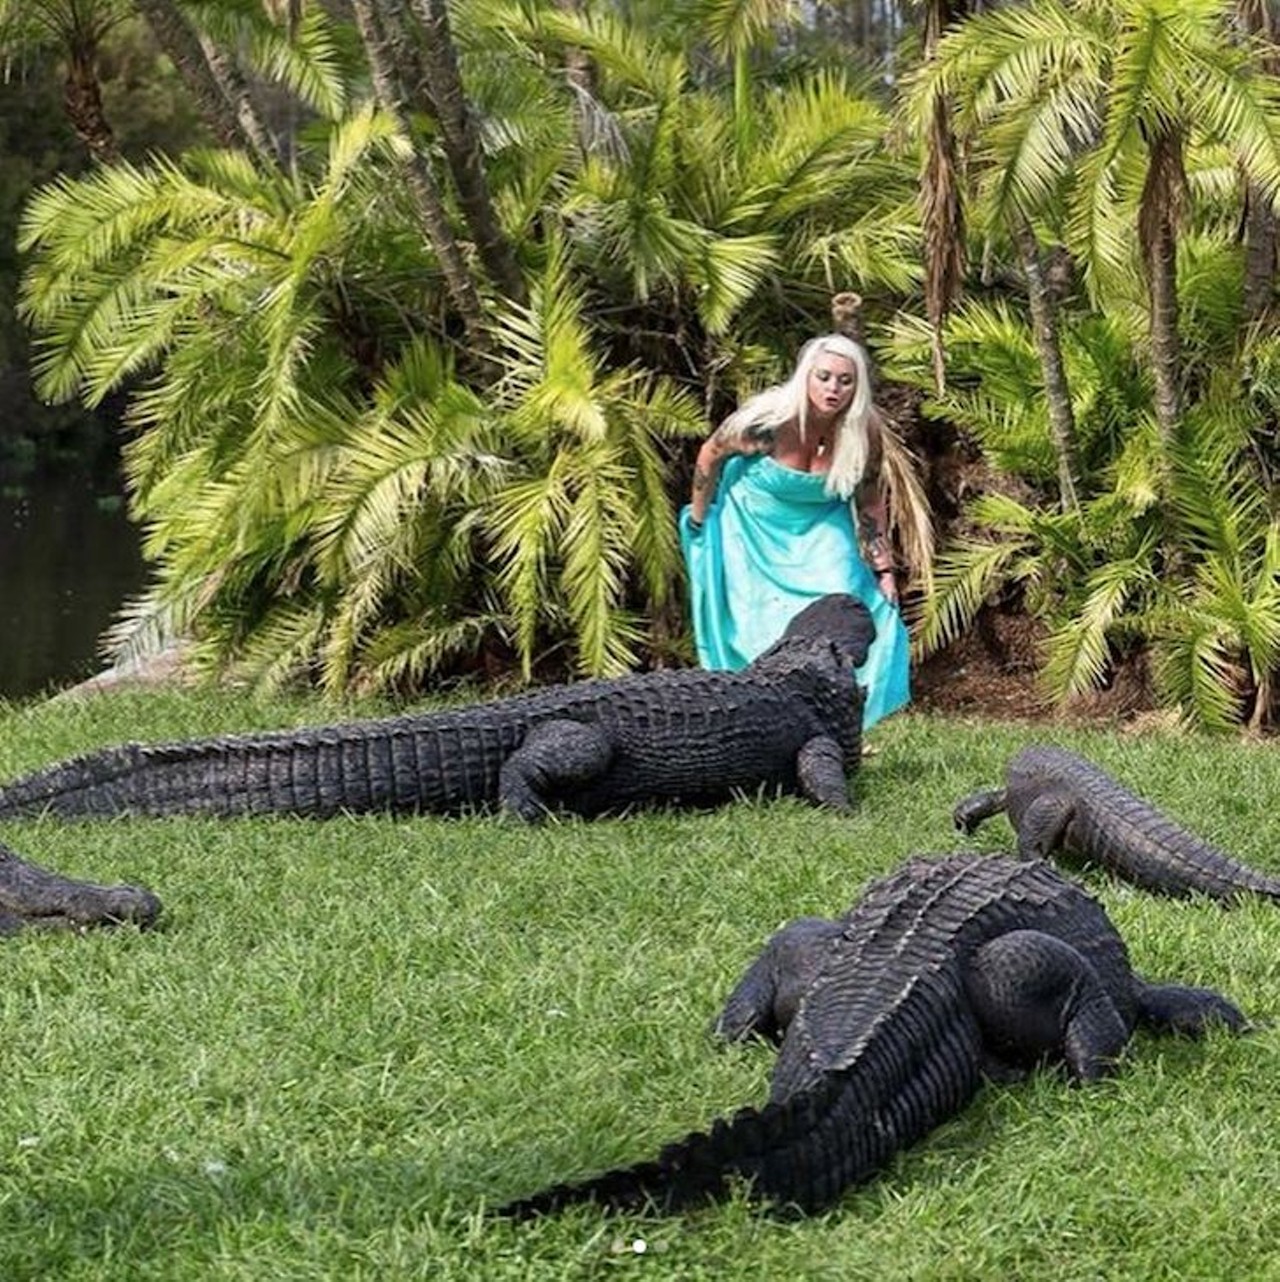 @savannahboan
Follow the life of a Gatorland animal education ambassador and her love for alligators.